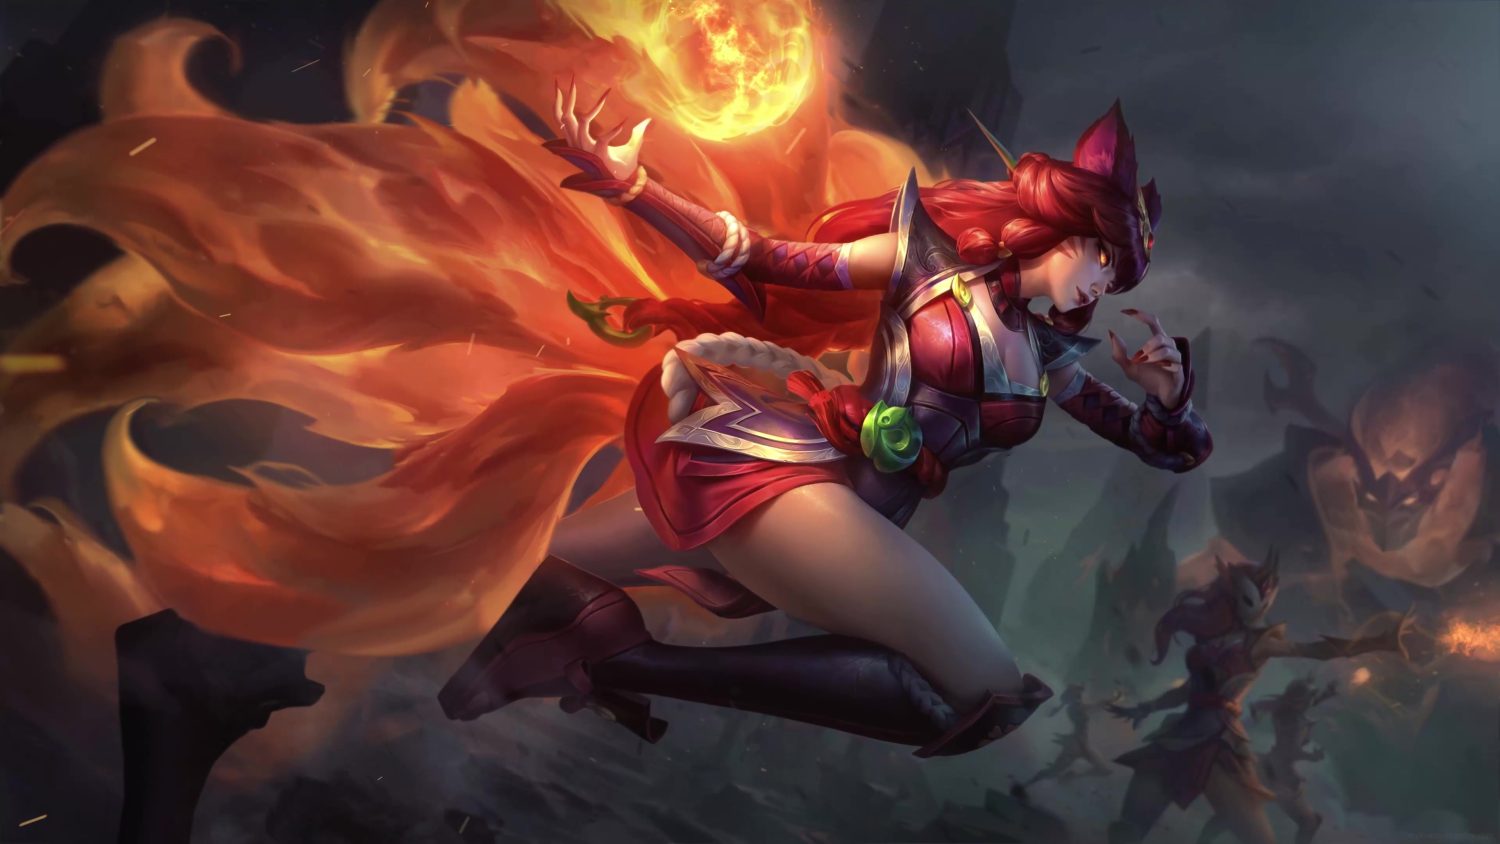 Learn more about Ahri's backstory and abilities in the official League of Legends universe.
3. Ahri - Leaguepedia - wide 9